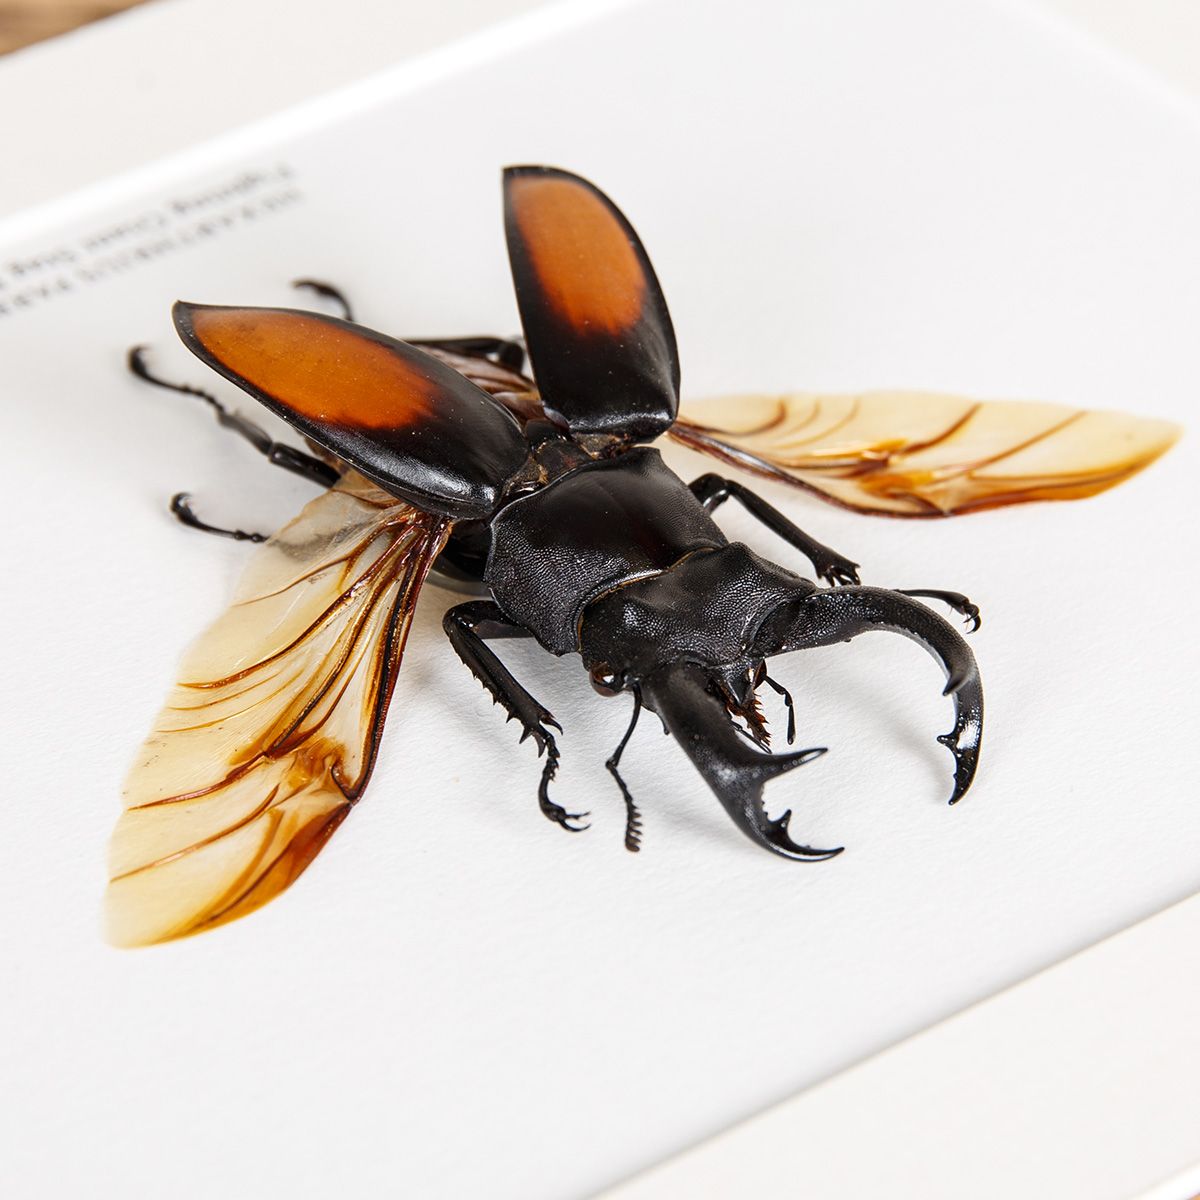 Fighting Giant Stag Beetle in Box Frame (Hexarthrius parryi)